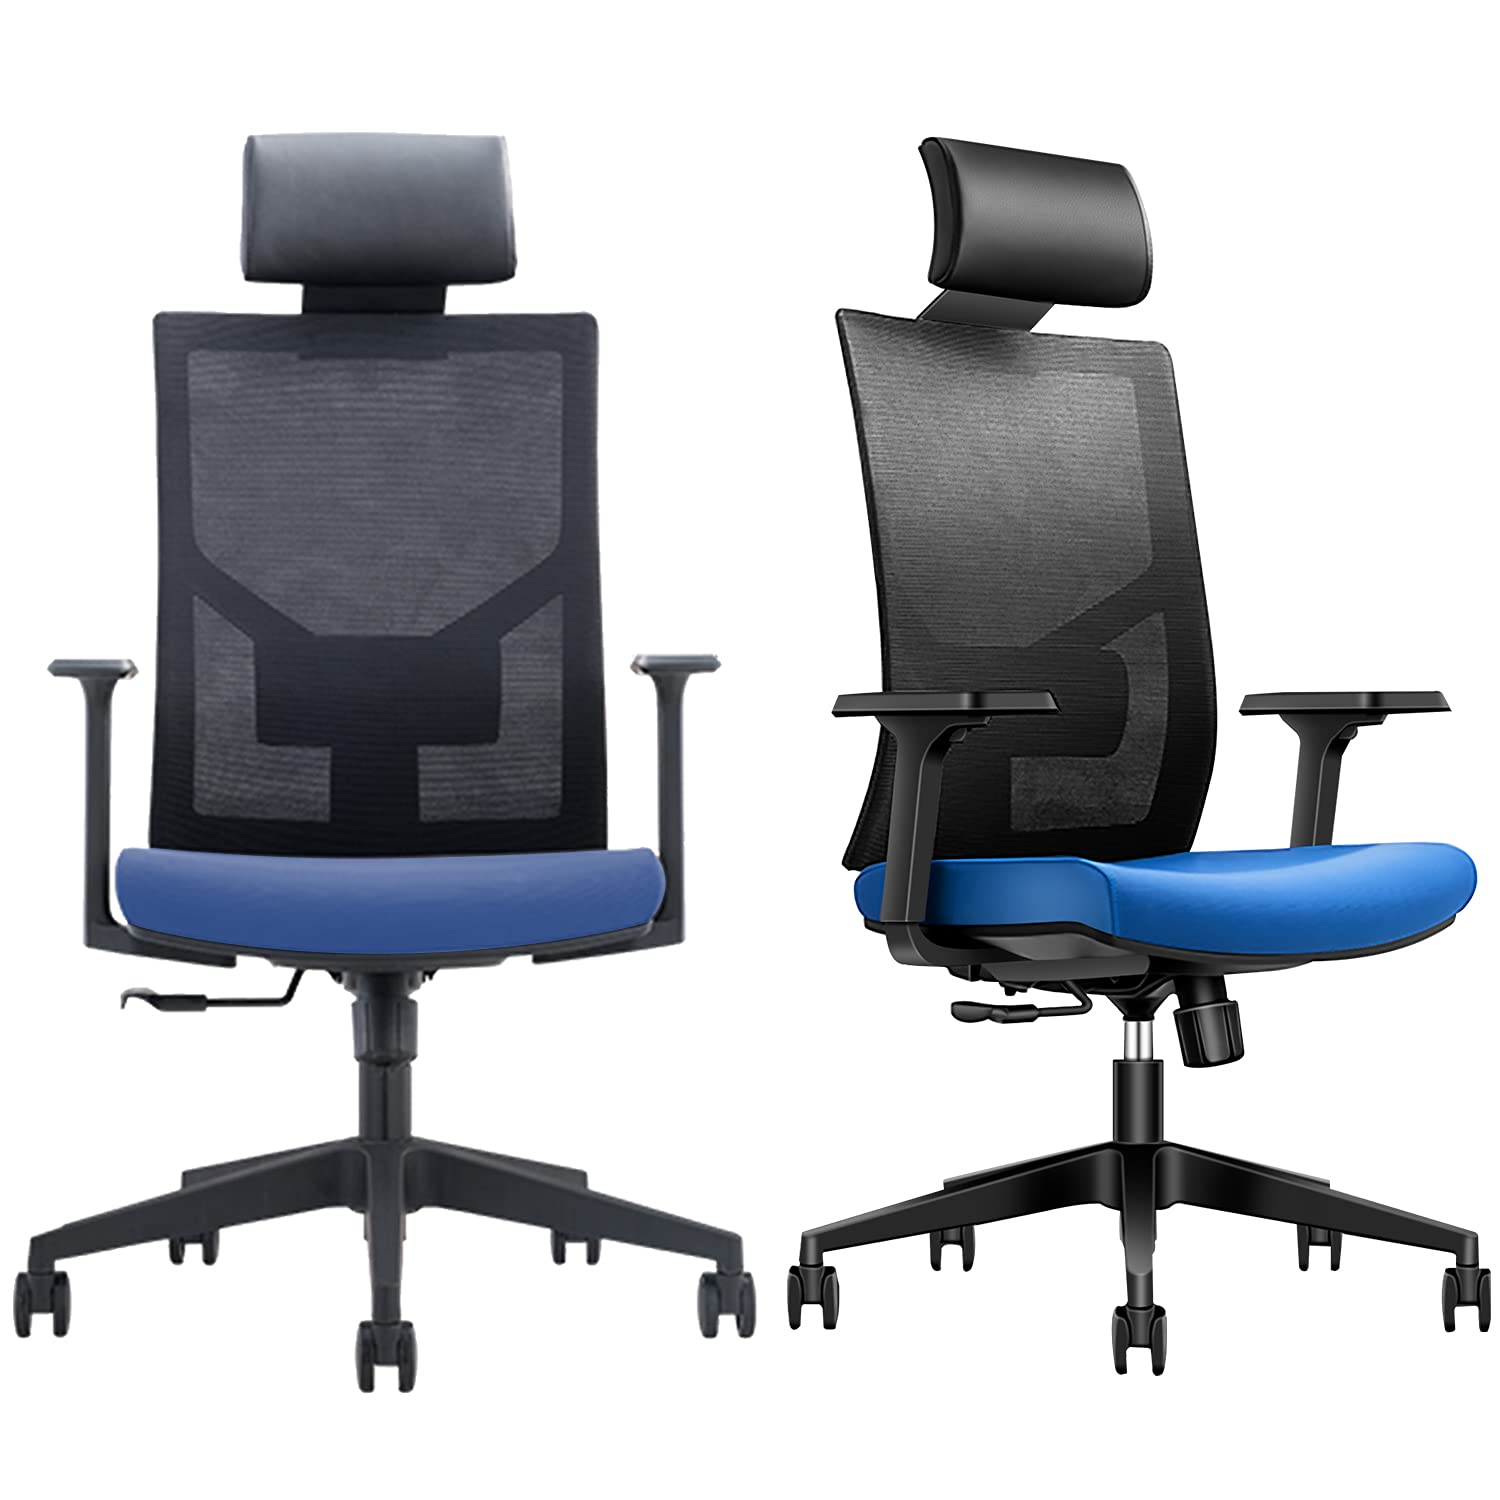 Desk Chair with Ridiculously Comfortable High Back -Office Chair with Thick Seat Cushion,Black (Blue)